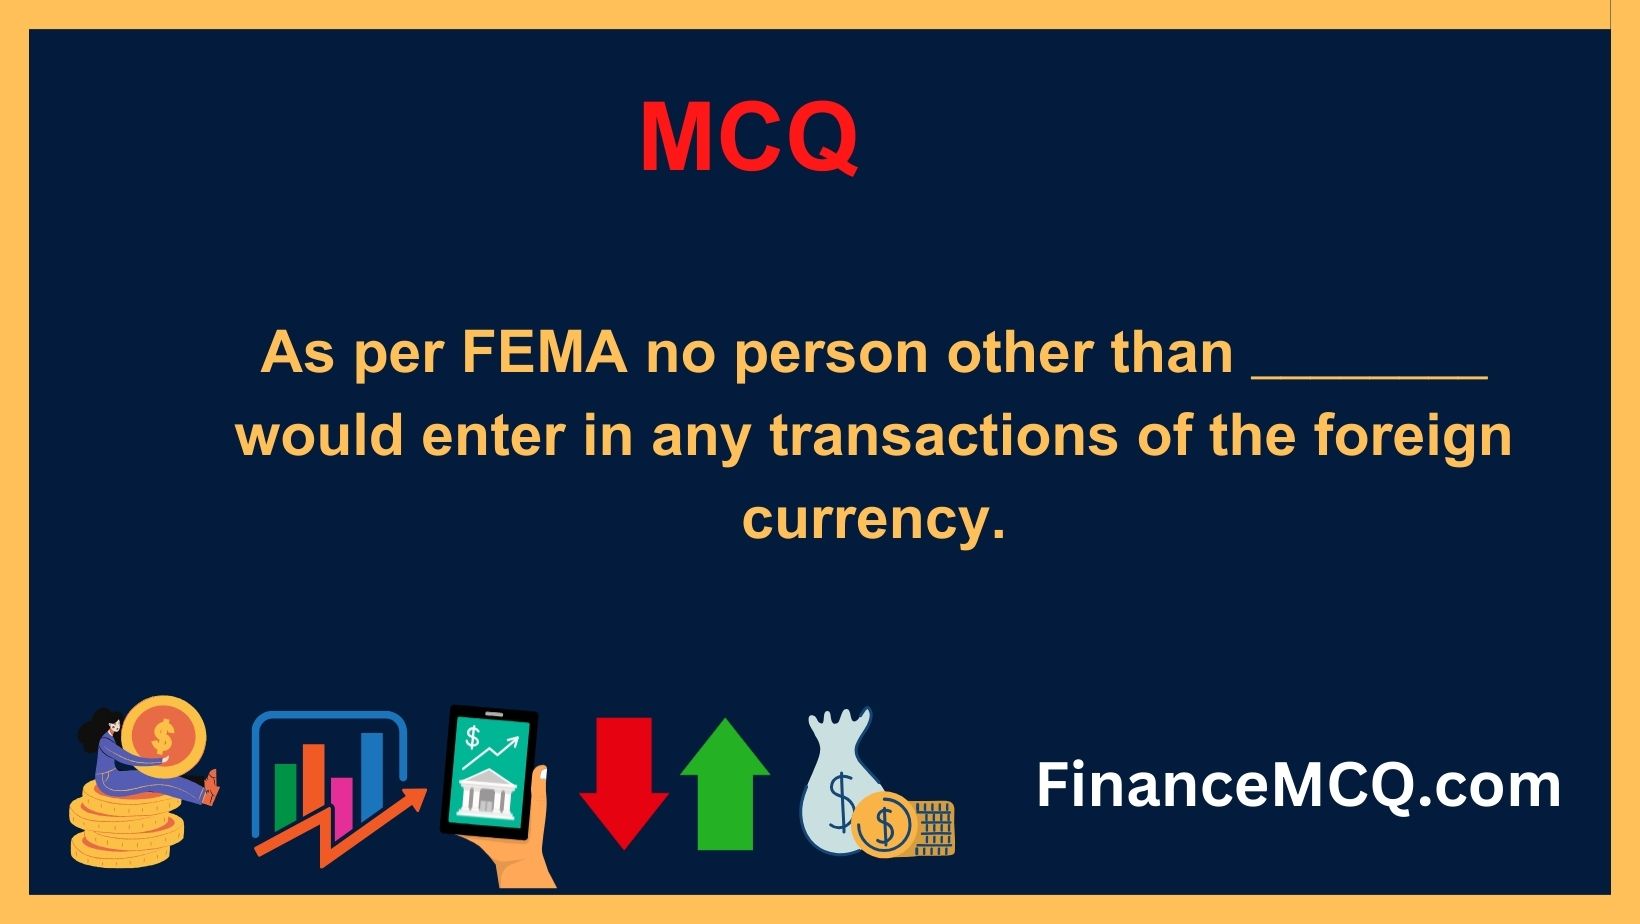 As per FEMA no person other than ________ would enter in any transactions of the foreign currency.